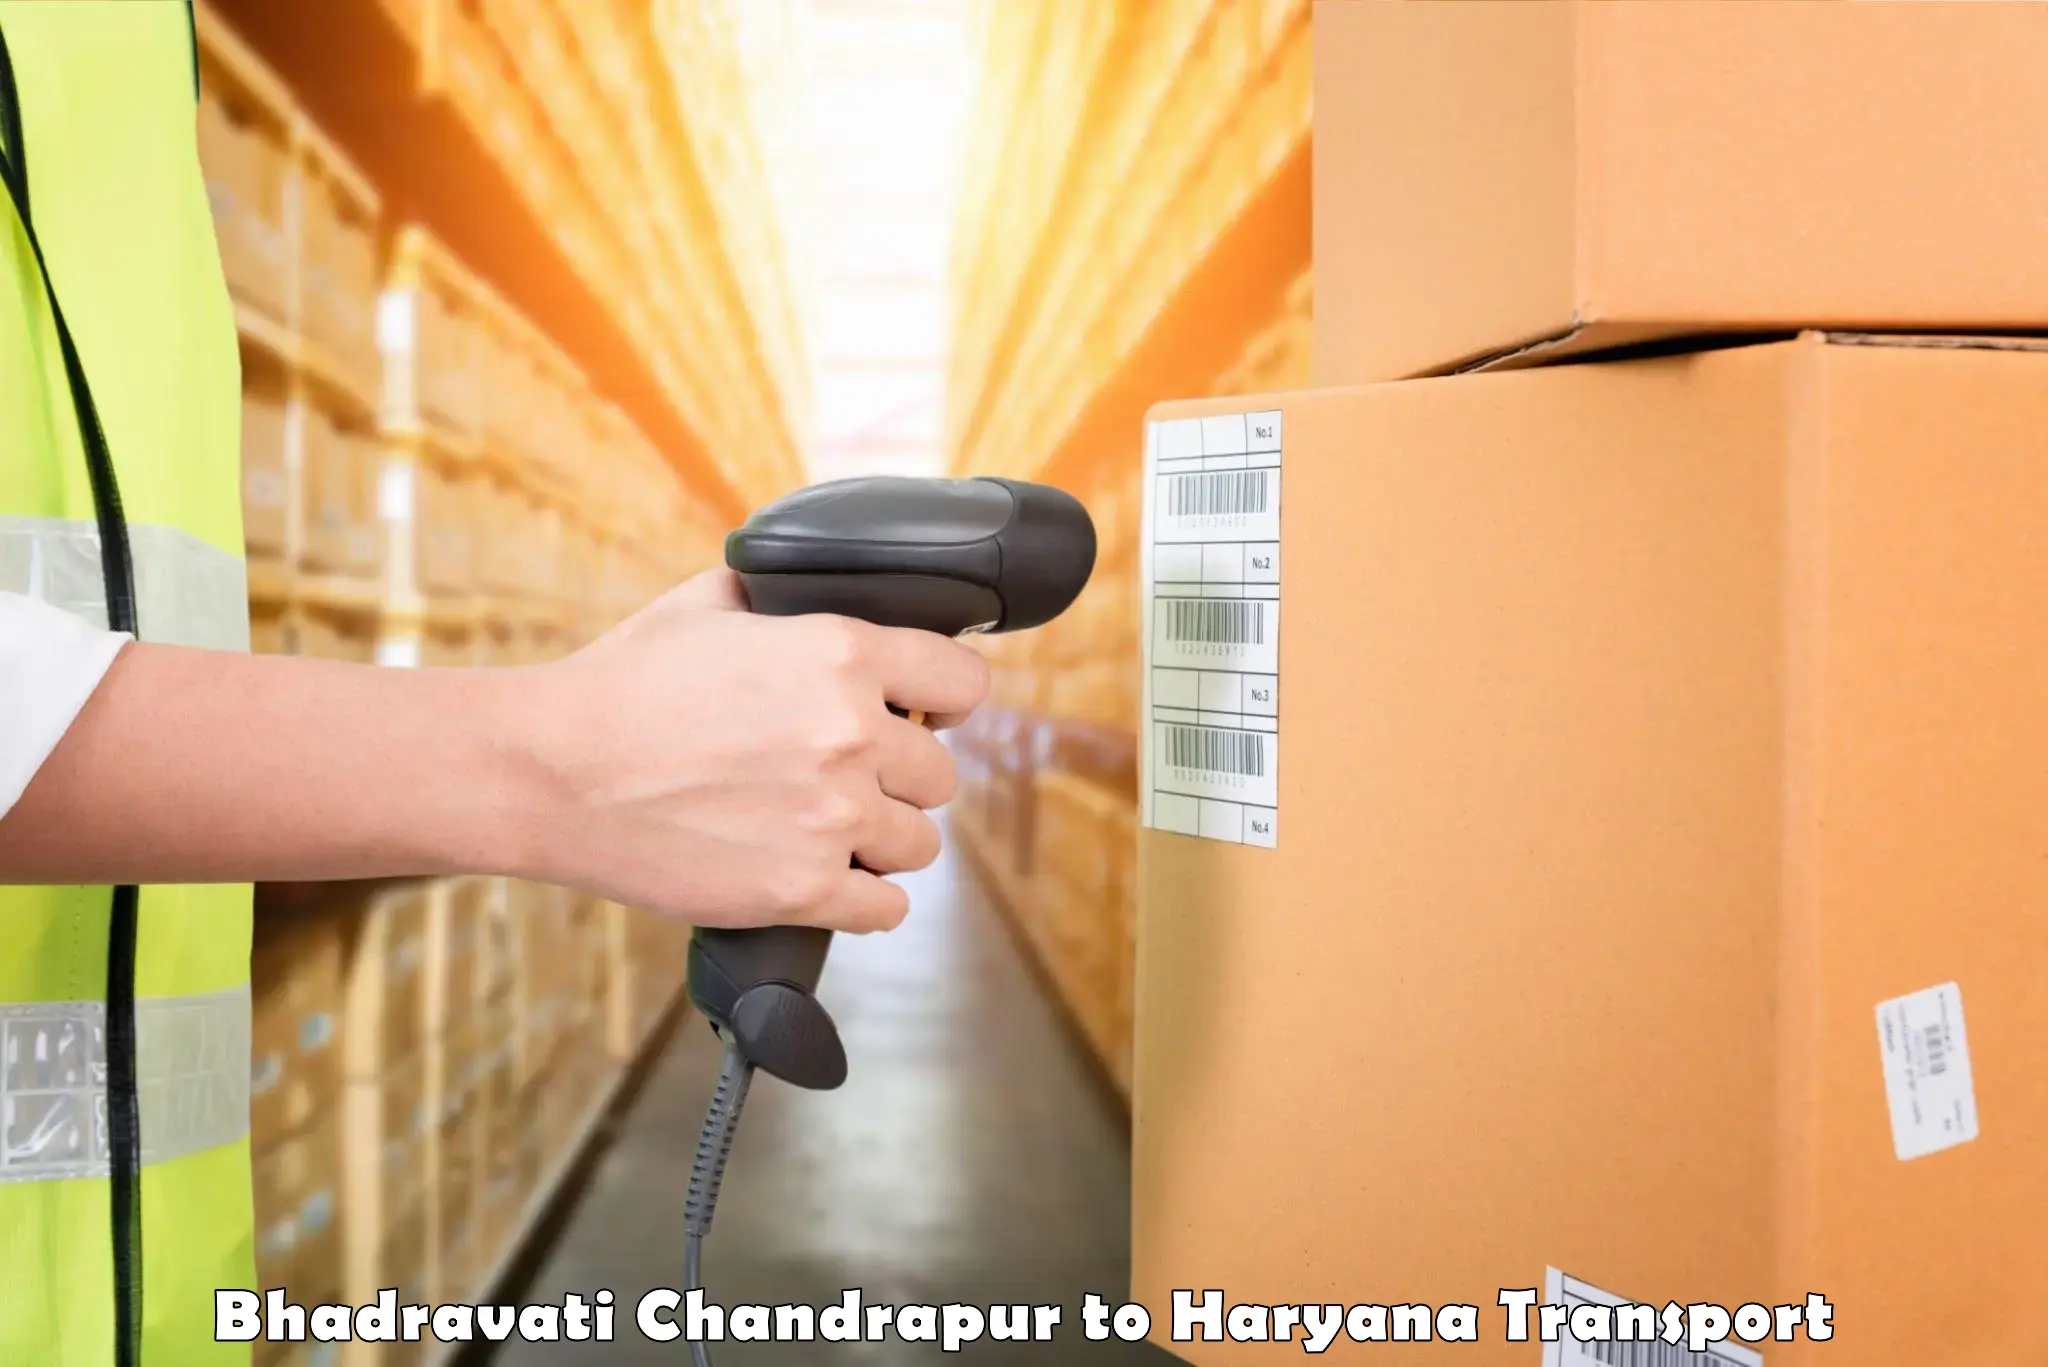 Truck transport companies in India in Bhadravati Chandrapur to Chaudhary Charan Singh Haryana Agricultural University Hisar